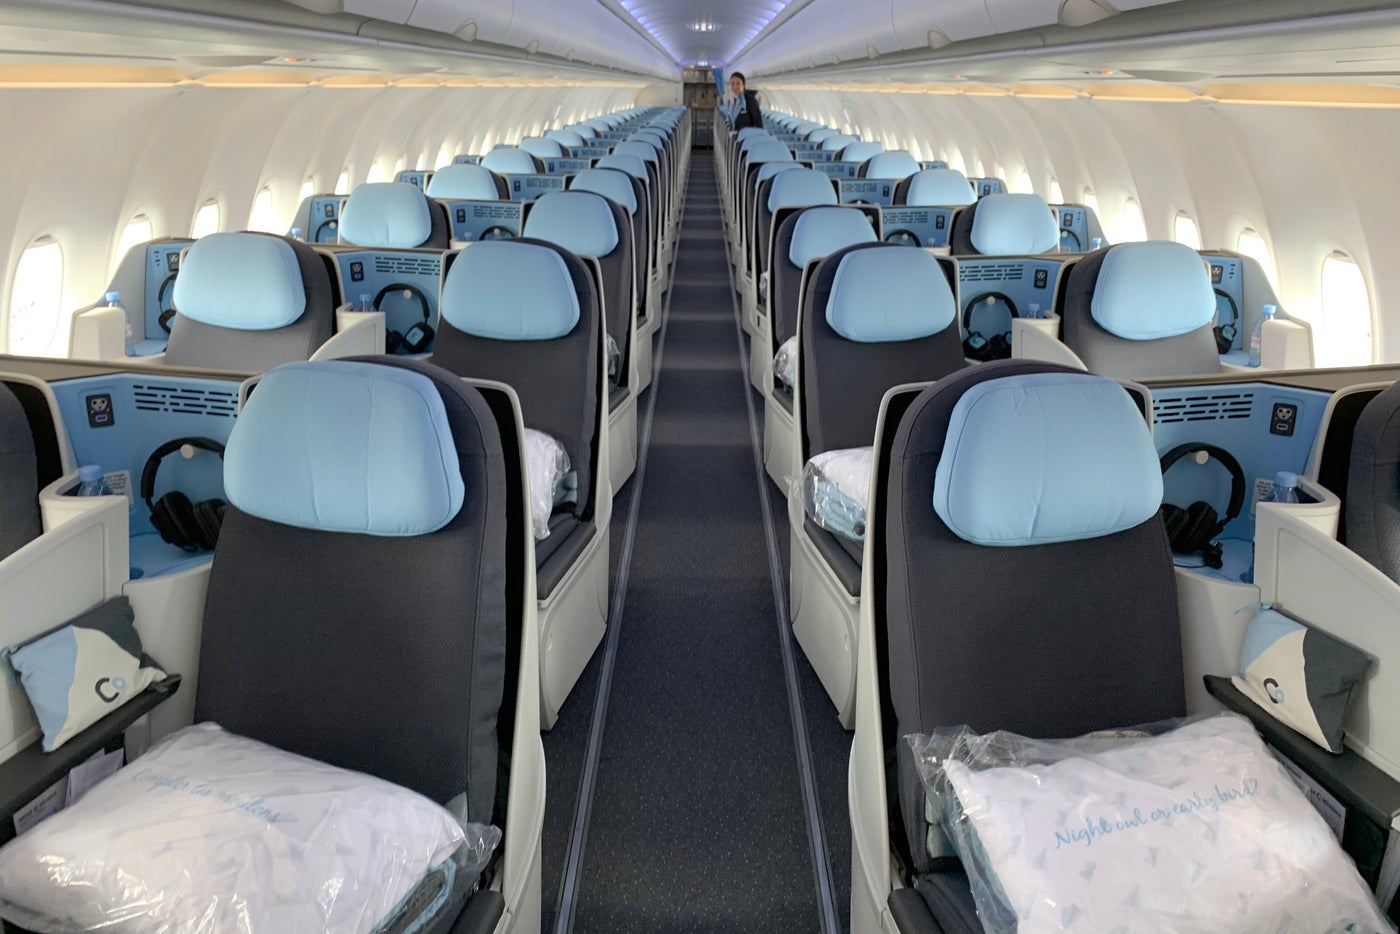 Flight Review: French Airline La Compagnie All-Business-Class NYC to Italy